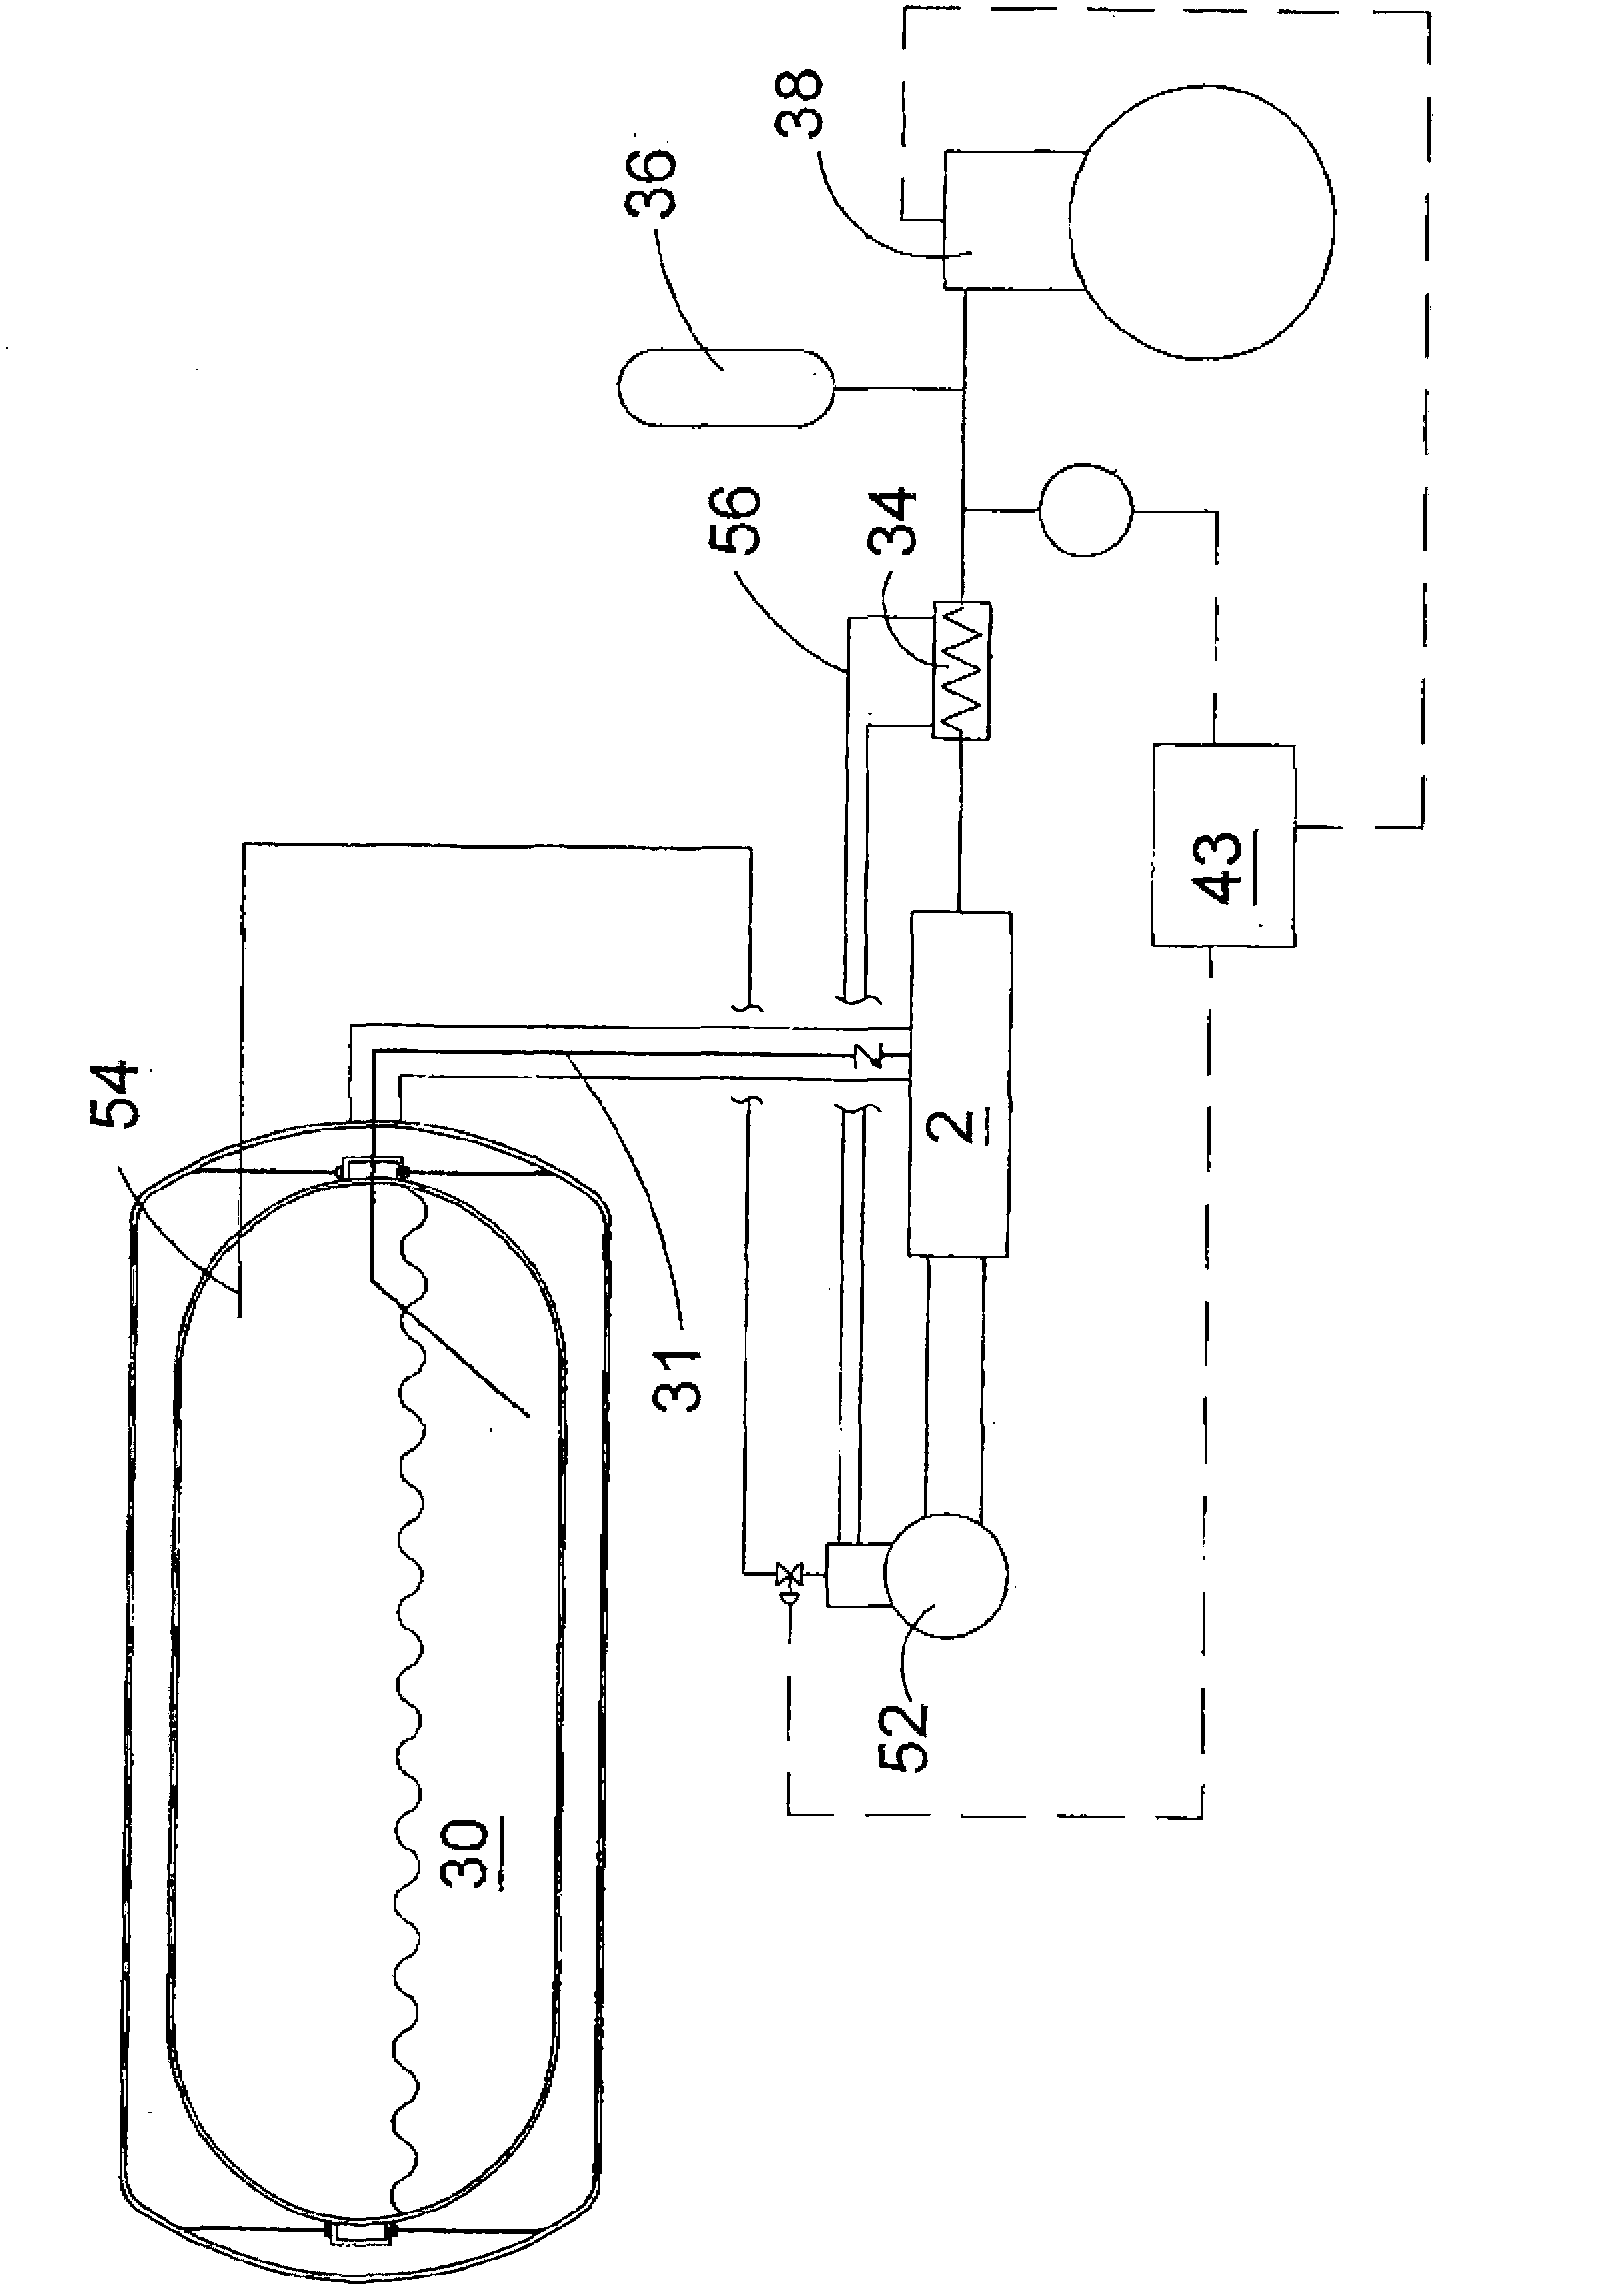 Two engine system with a gaseous fuel stored in liquefied form